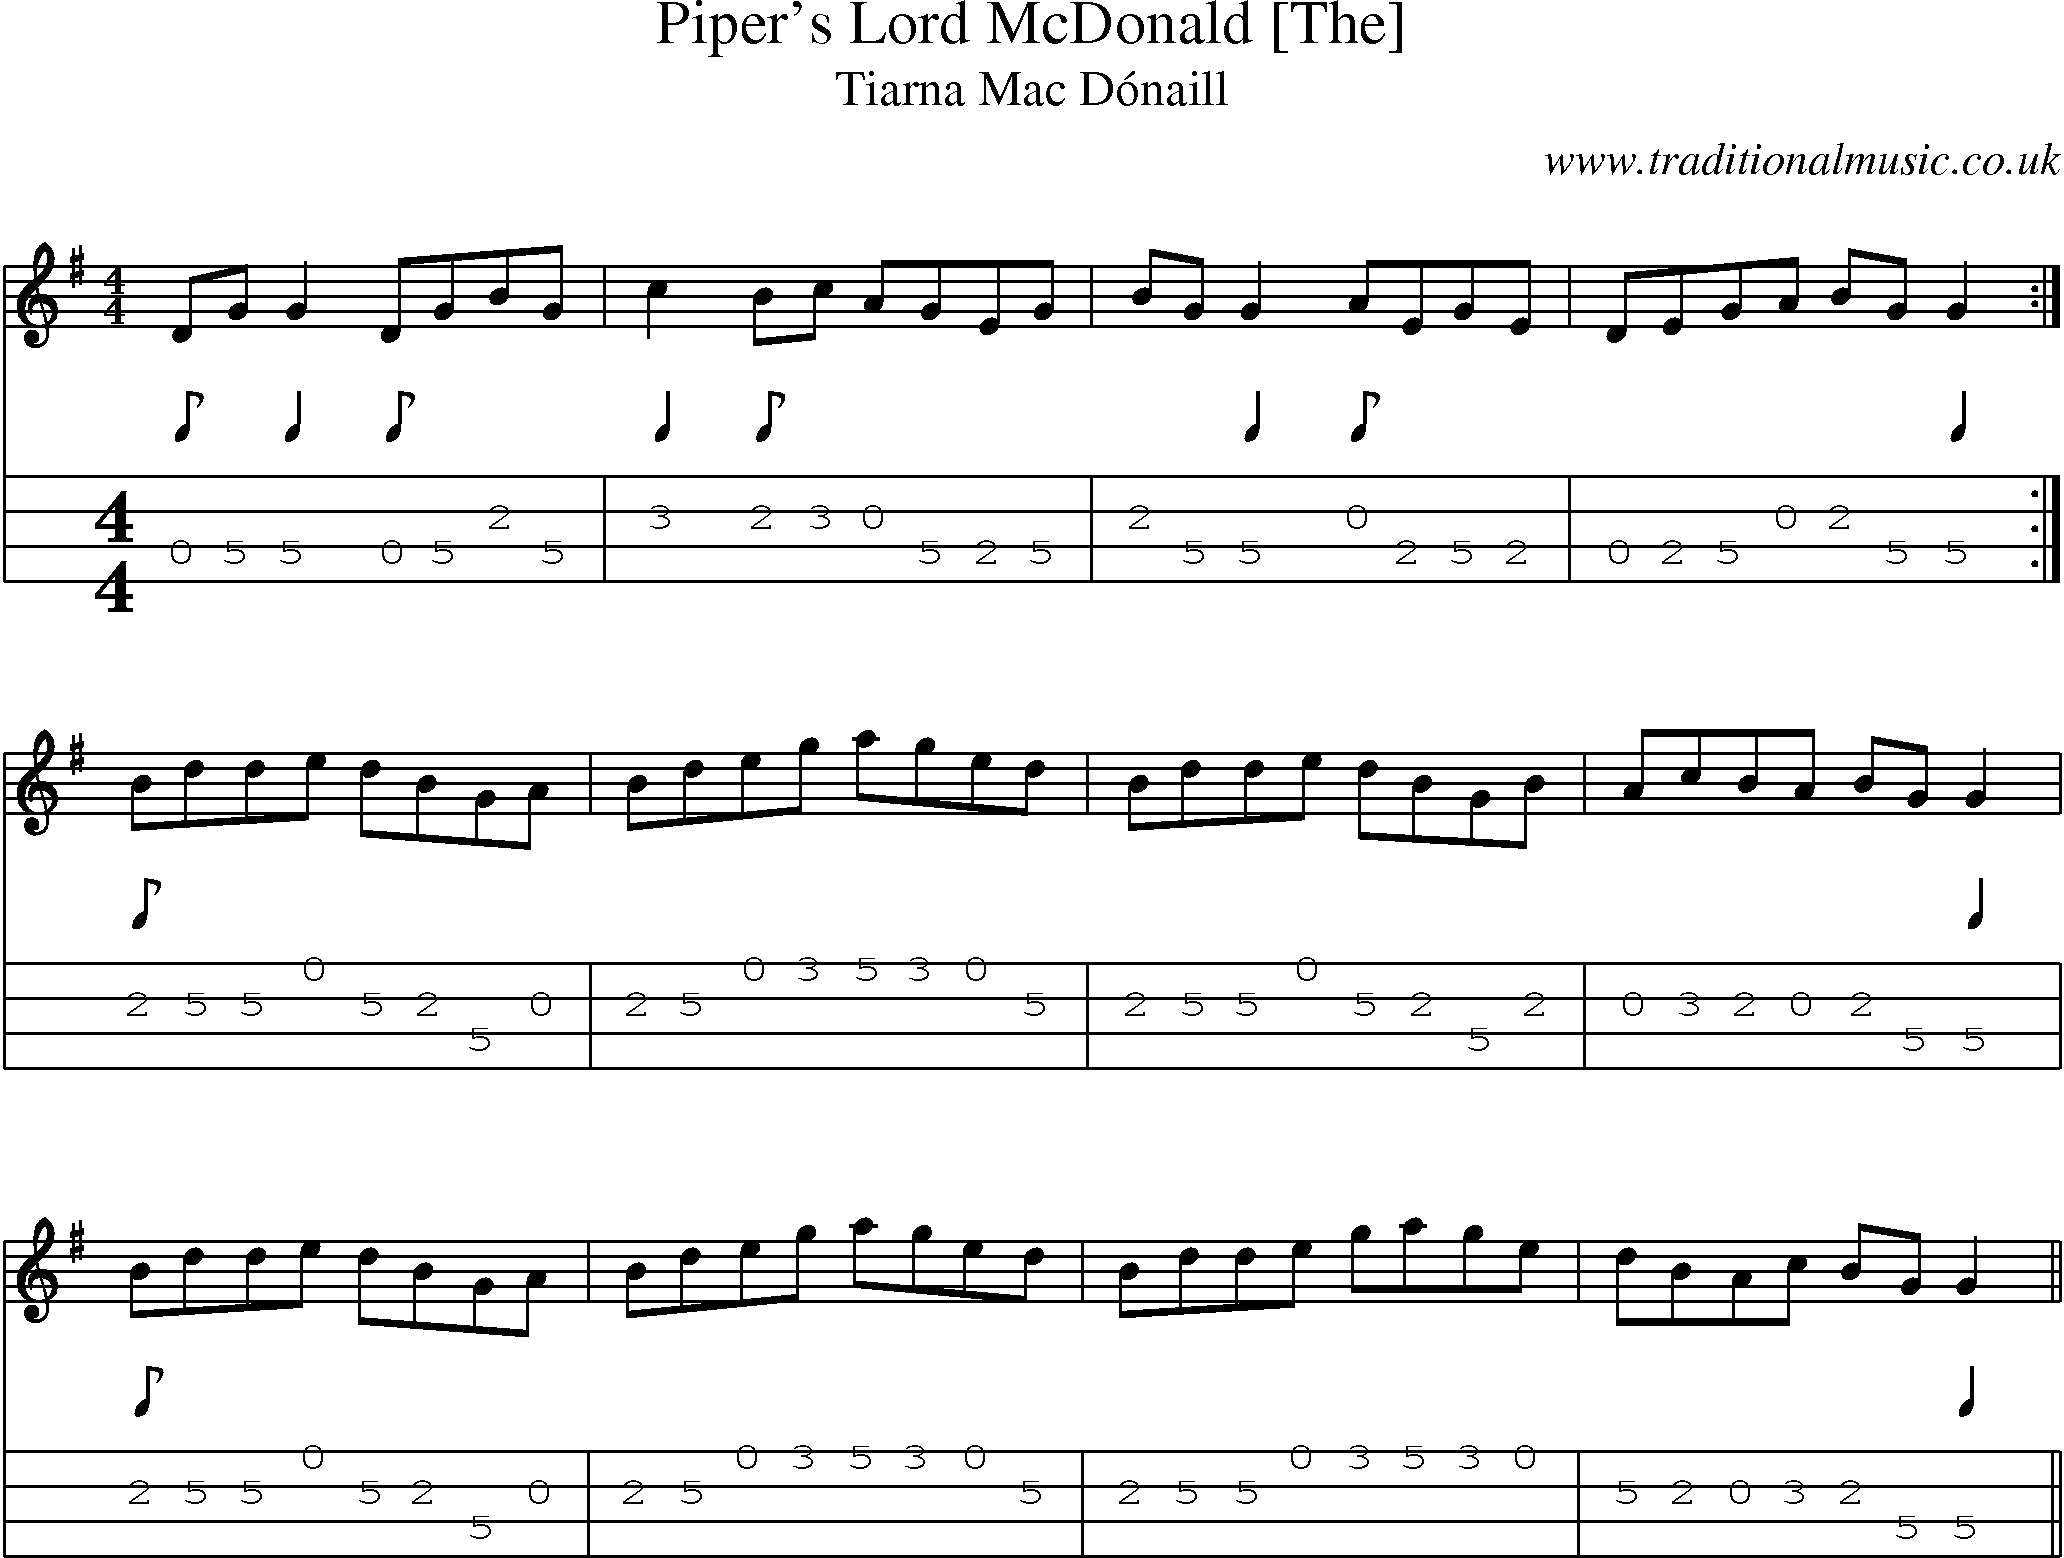 Music Score and Mandolin Tabs for Pipers Lord Mcdonald